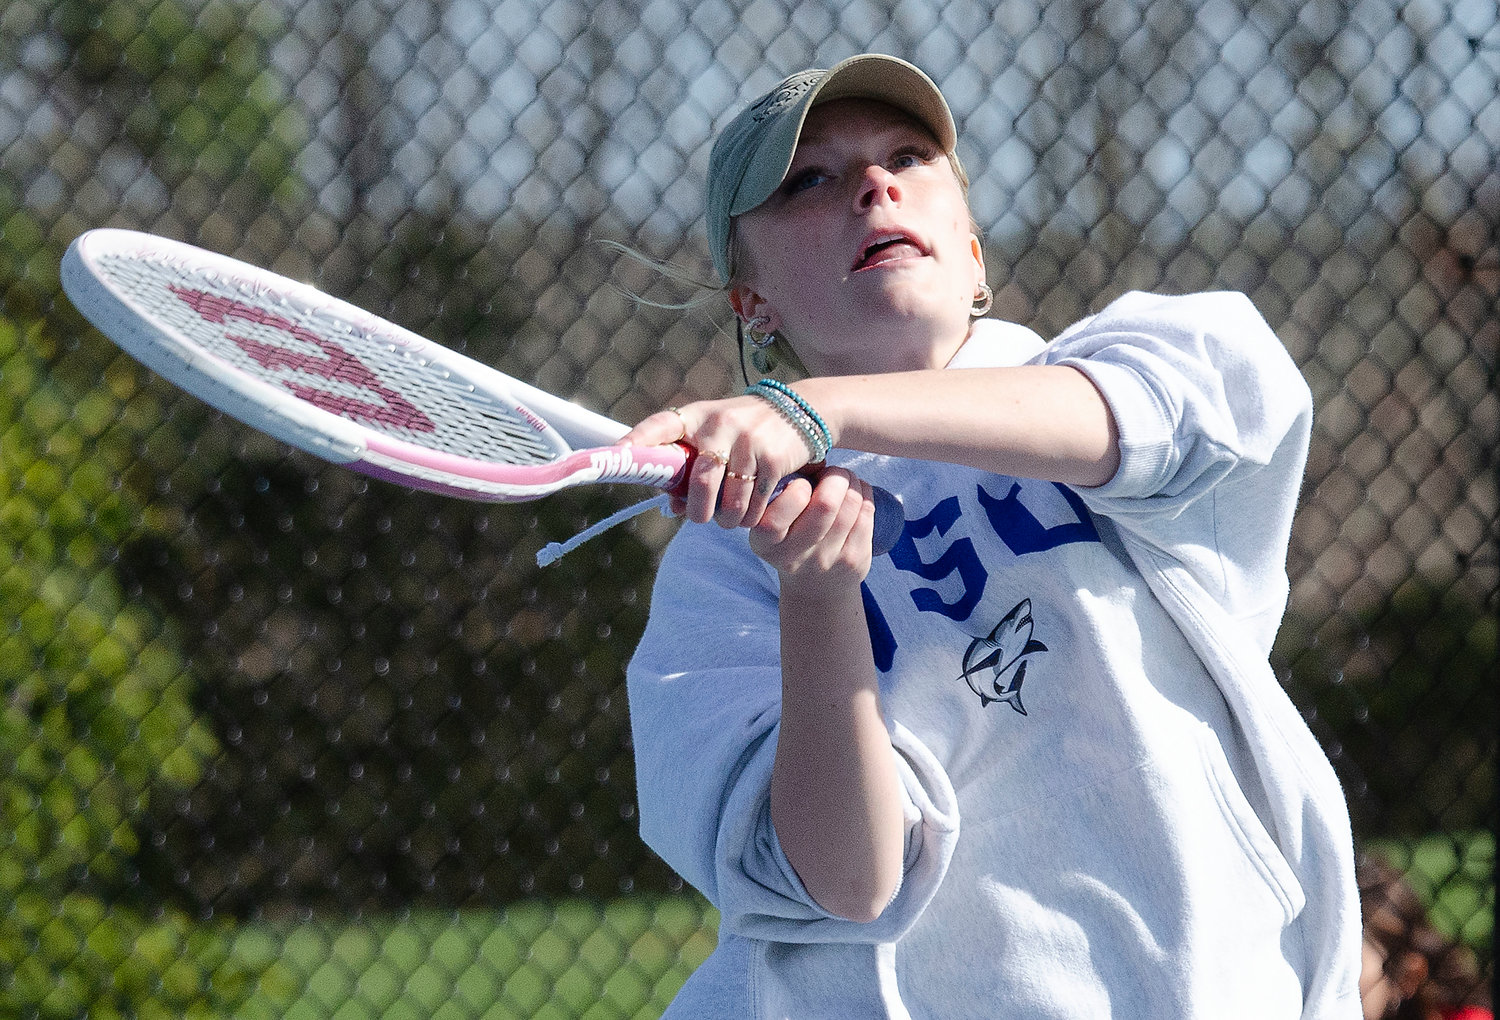 Wildcats senior captain and third singles player Sam Parker beat Cougars' Grace Rodriguez, 6-0, 6-0.